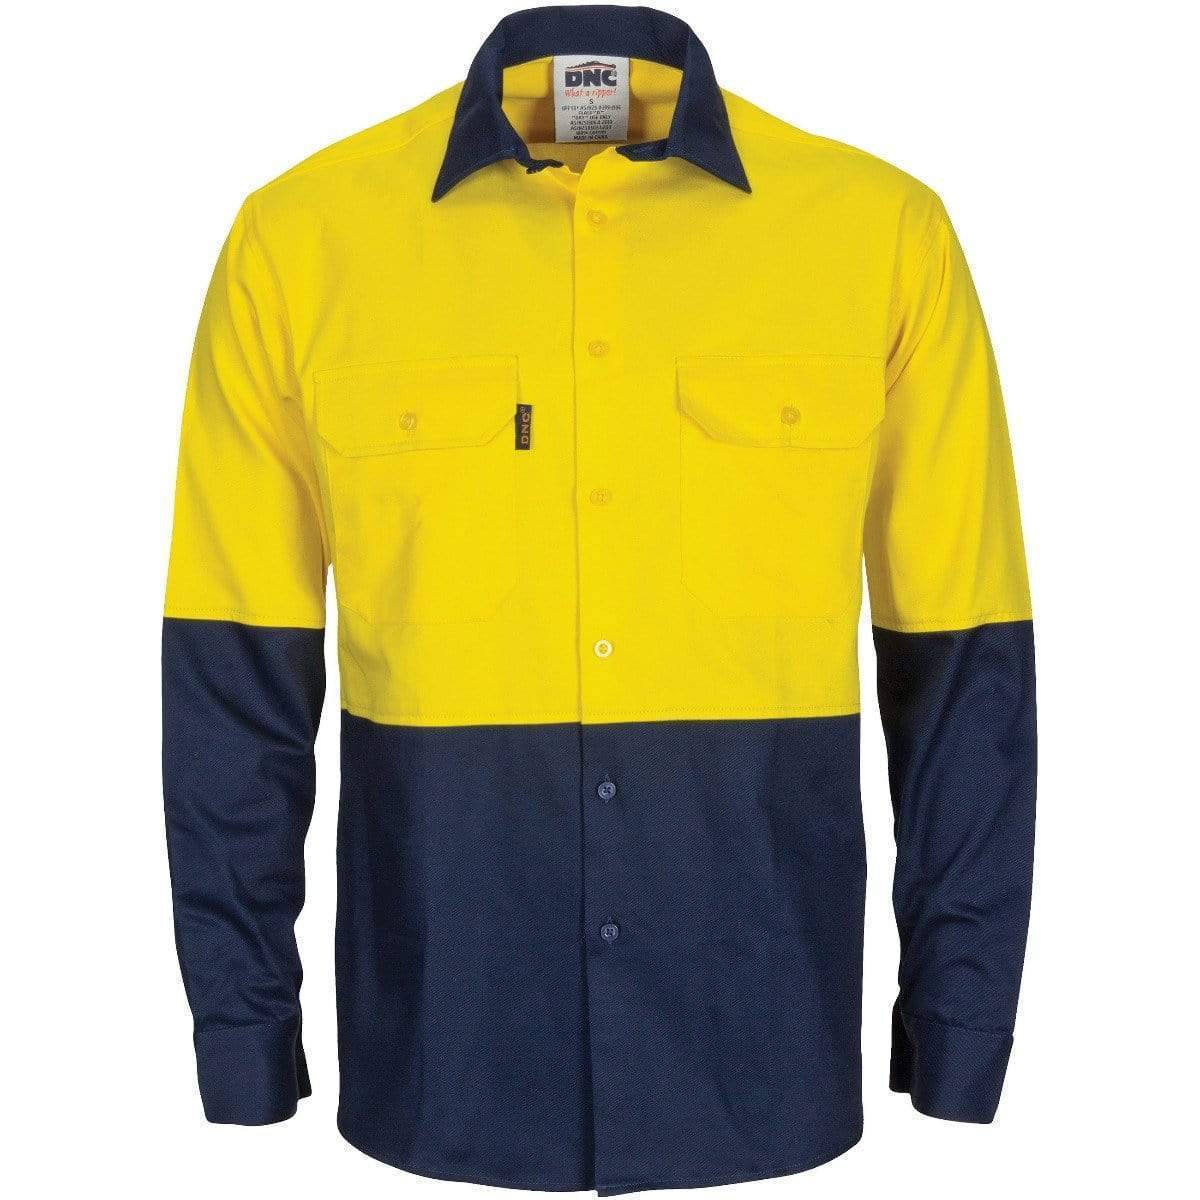 Dnc Workwear Hi-vis R/w Cool-breeze T2 Vertical Vented Long Sleeve Cotton Shirt With Gusset Sleeves - 3781 Work Wear DNC Workwear Yellow/Navy XS 